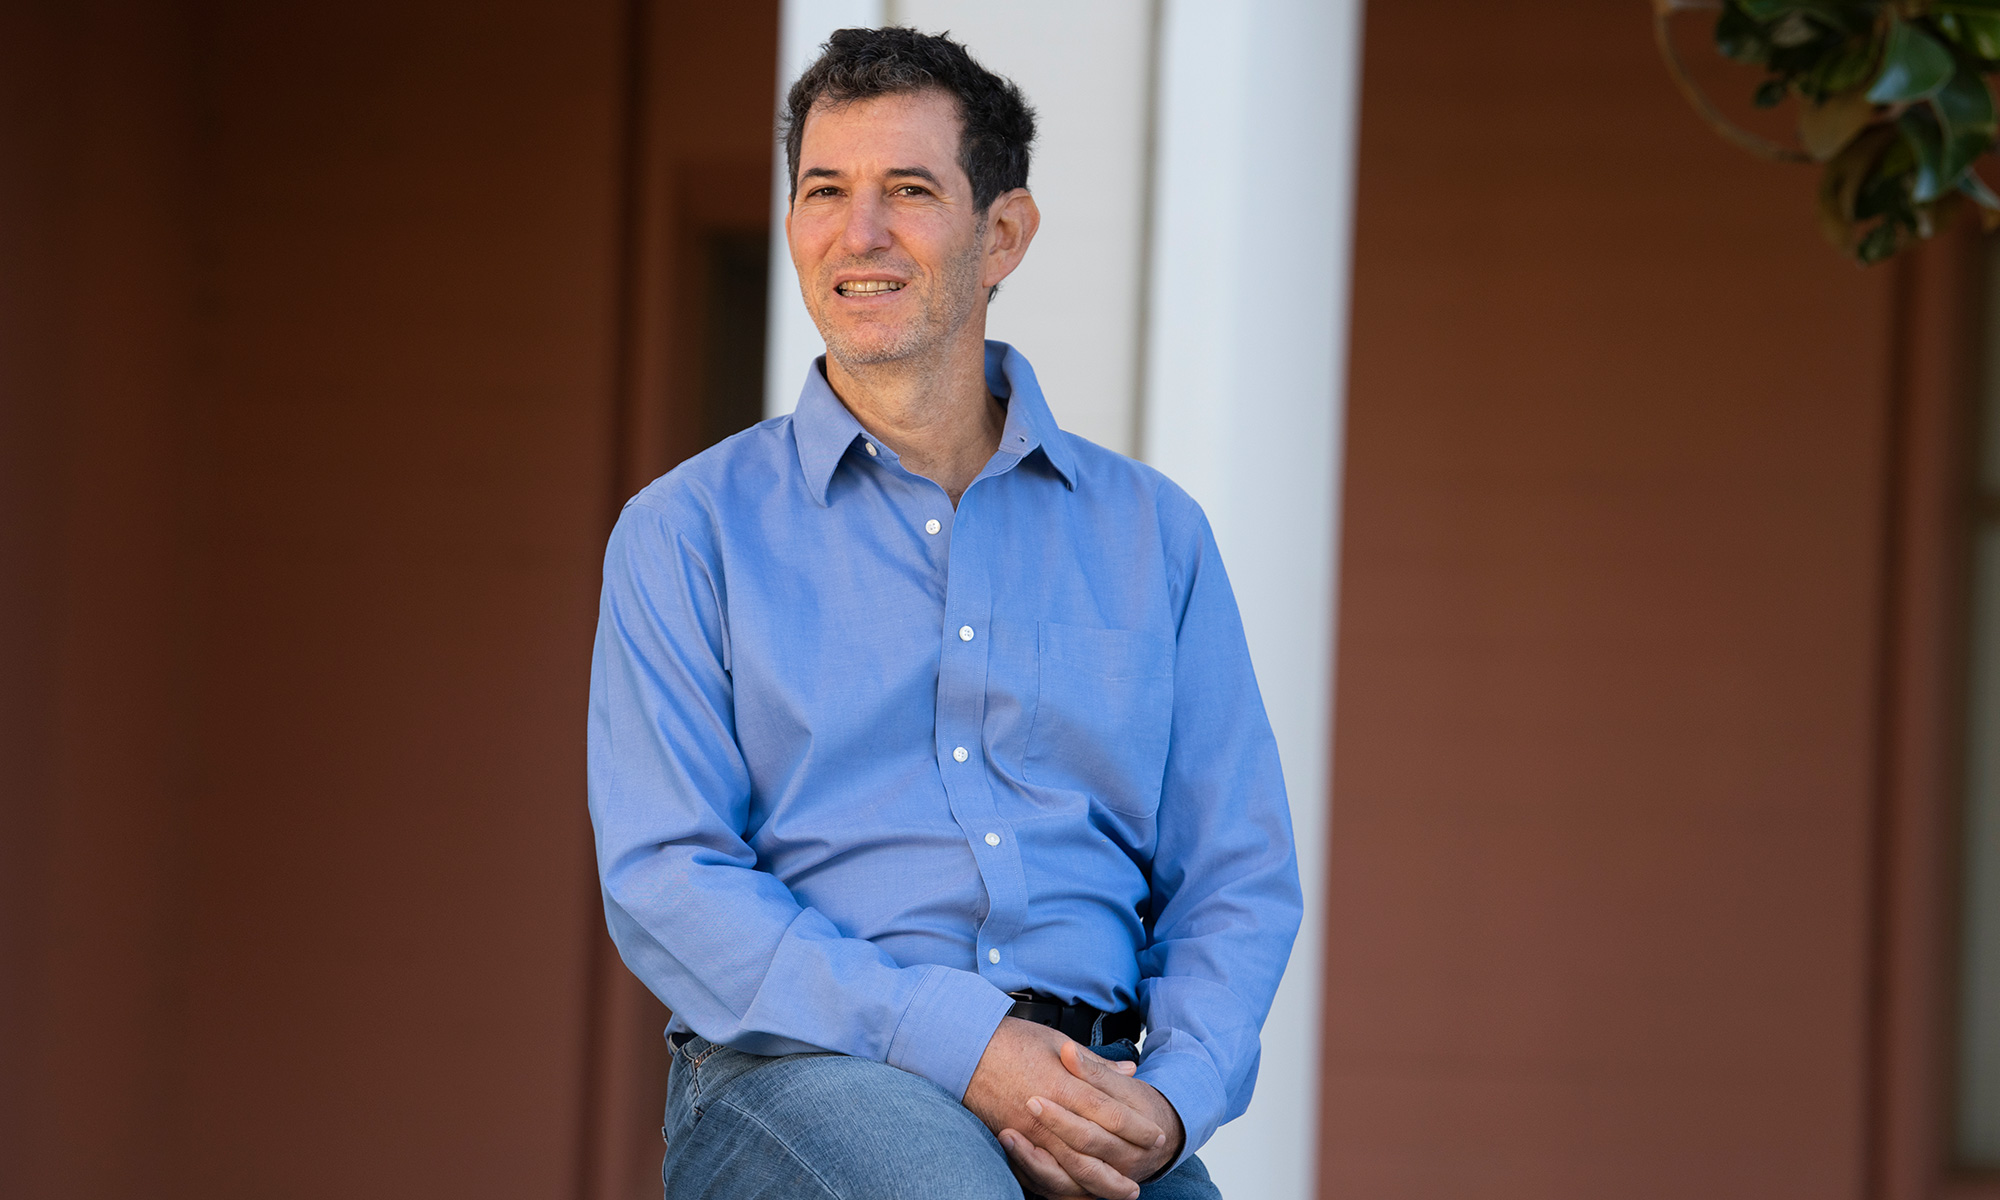 Professor Rick Robbins in a blue shirt photographed on campus